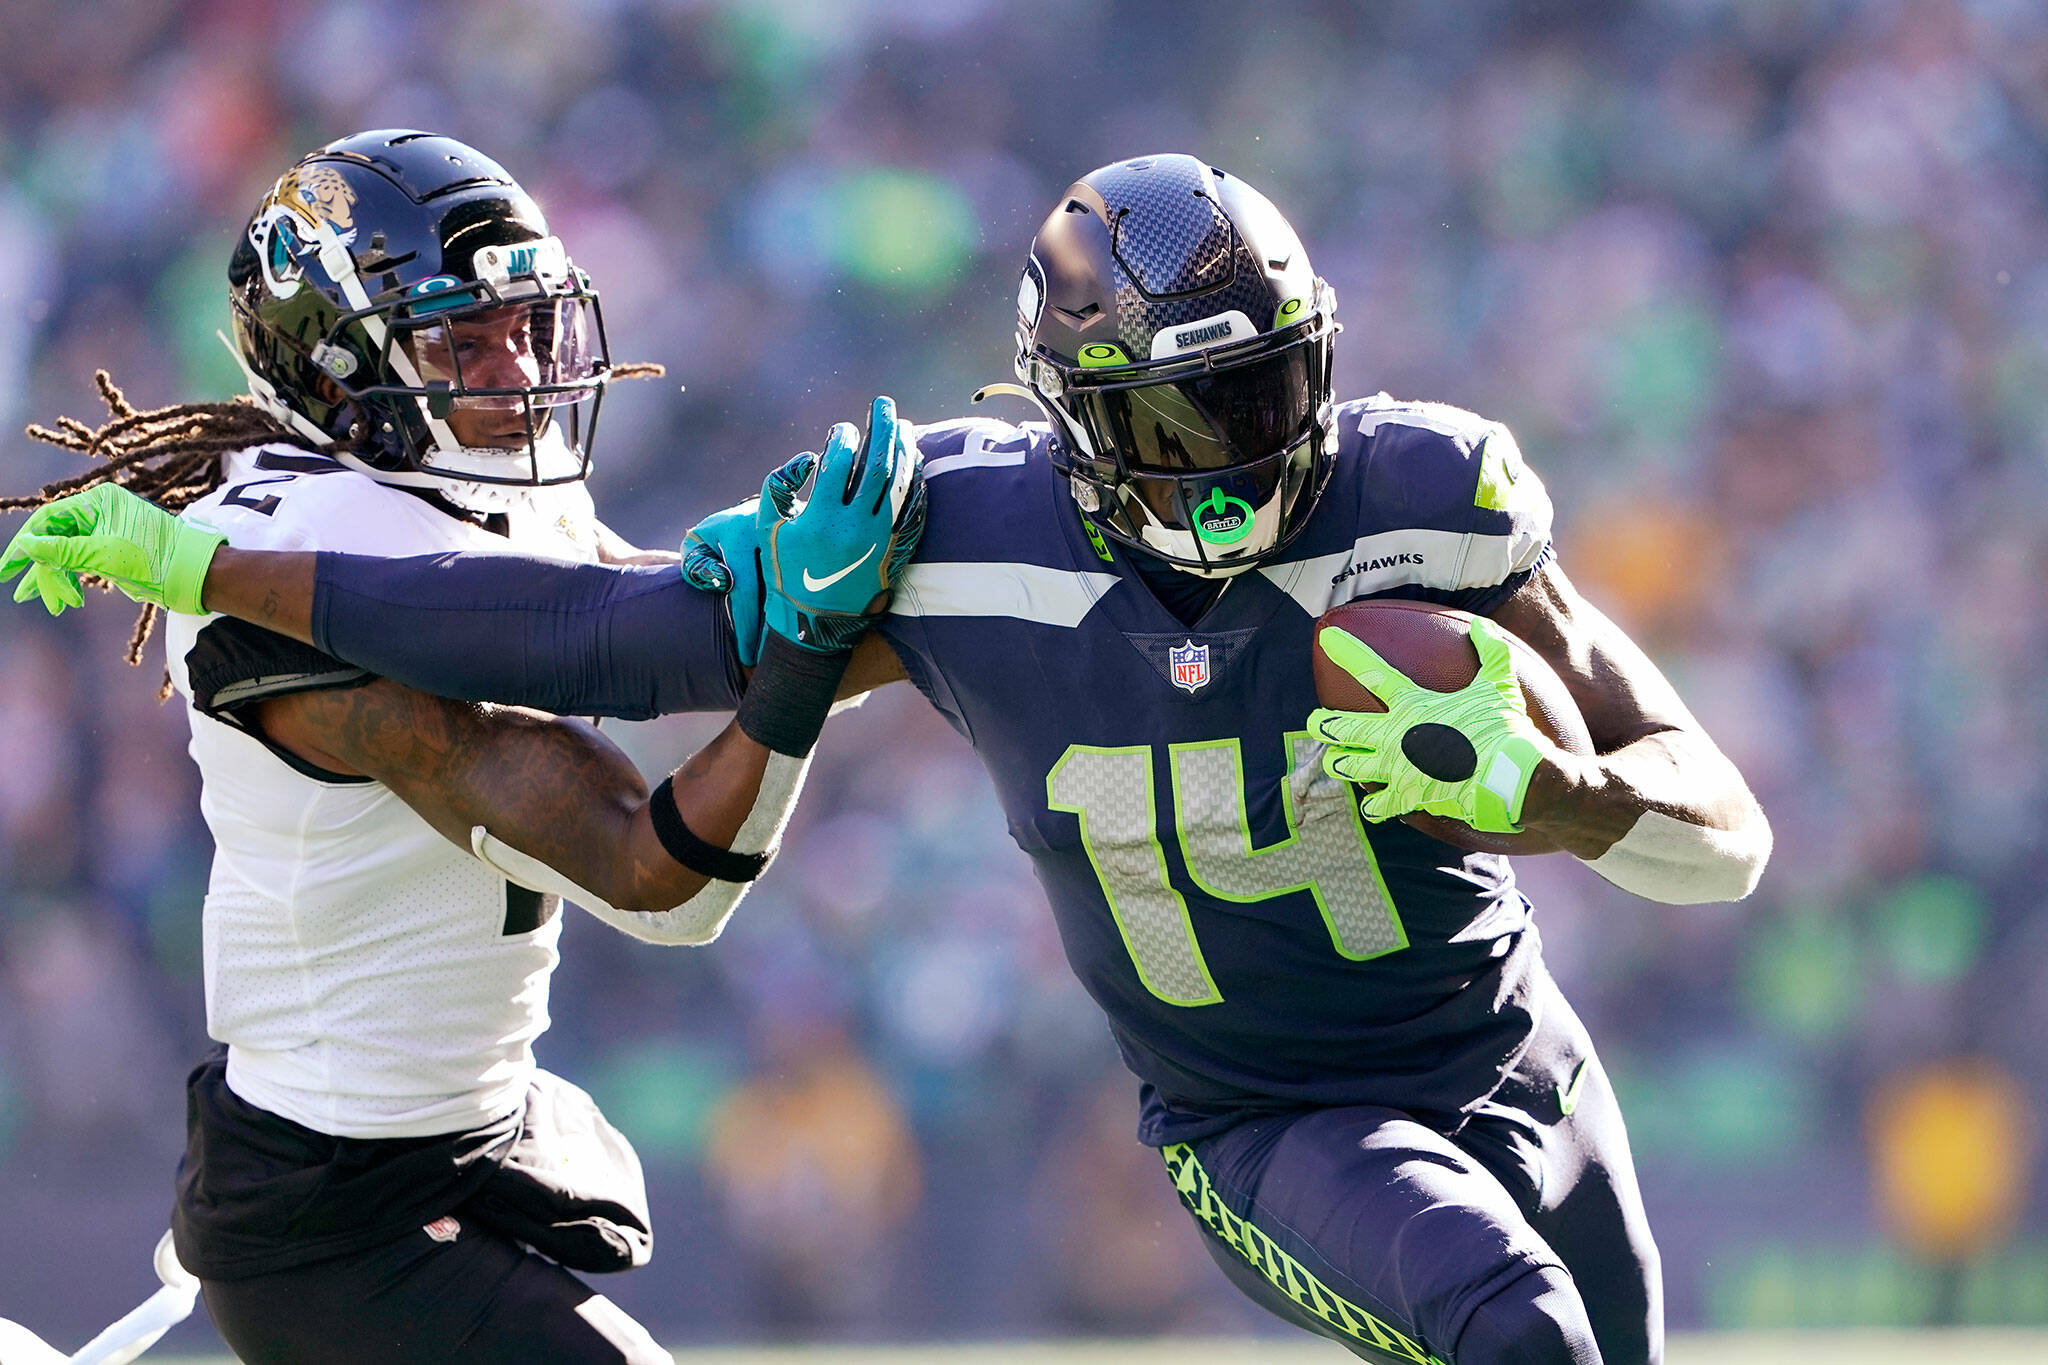 Seattle Seahawks wide receiver DK Metcalf (14) pushes off of Jacksonville Jaguars defensive back Rayshawn Jenkins as he runs with the ball during the first half of a game Sunday in Seattle. (AP Photo/Ted S. Warren)